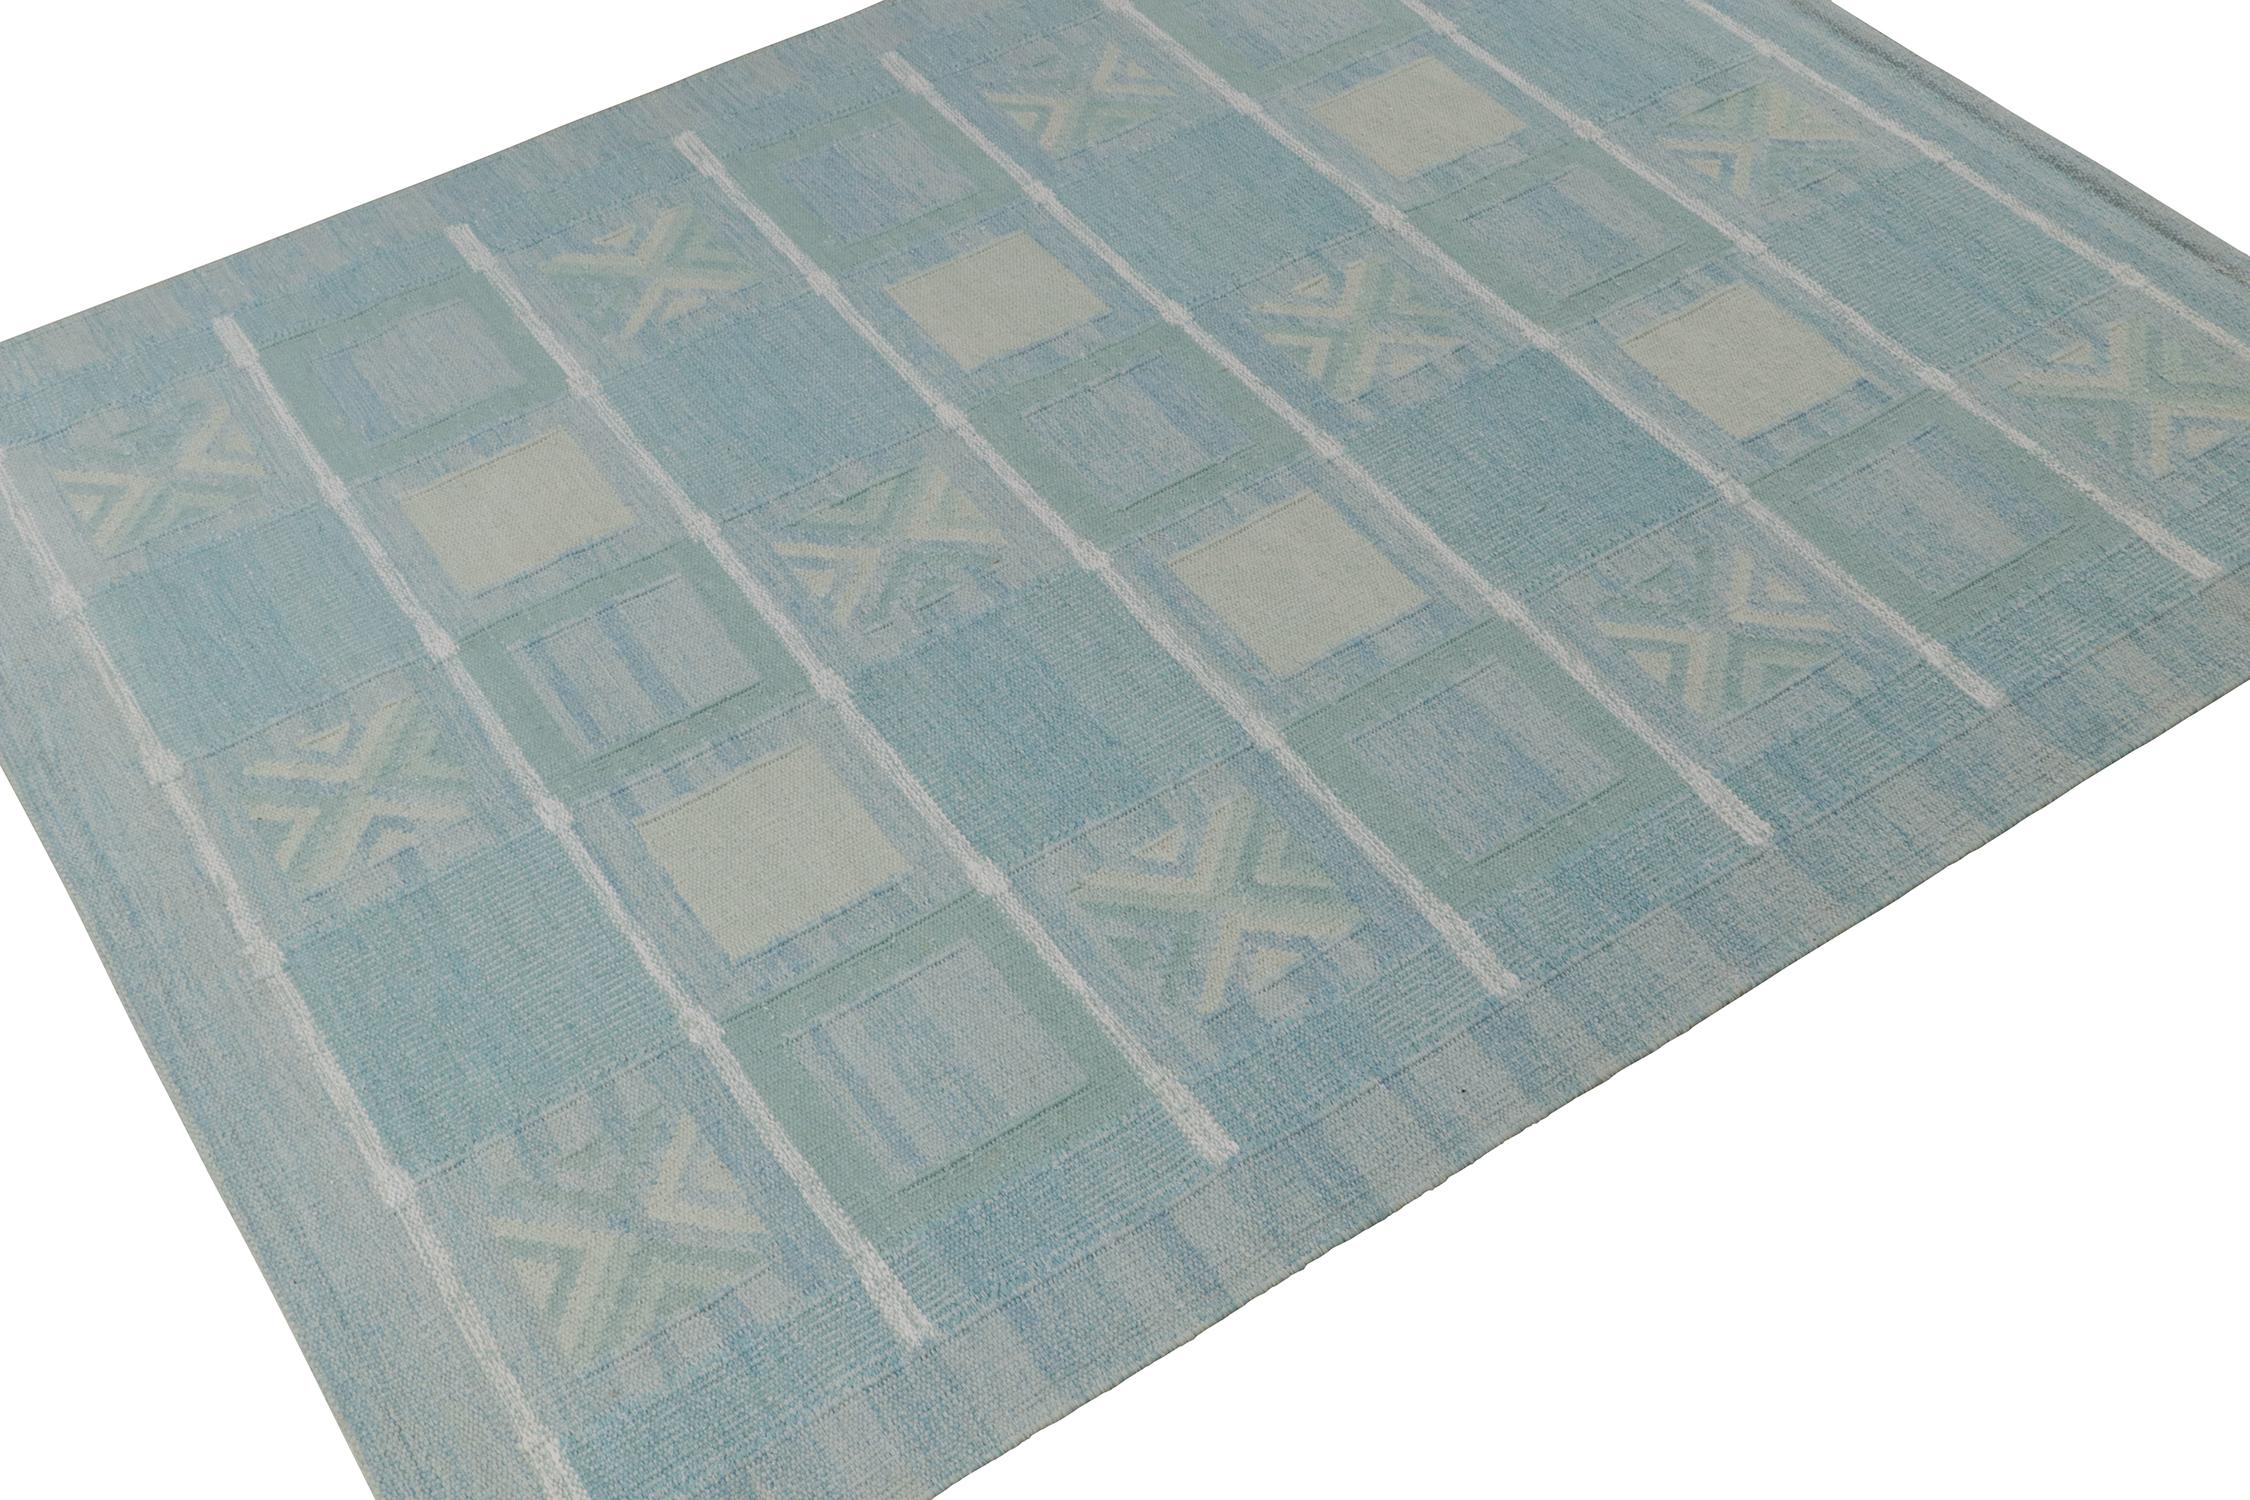 This 8x10 Swedish style kilim is the next addition to Rug & Kilim's award-winning Scandinavian flat weave collection. Handwoven in cotton. 
Further On the Design: 
This rug enjoys geometric patterns in seafoam blue, green and gray with a gorgeous